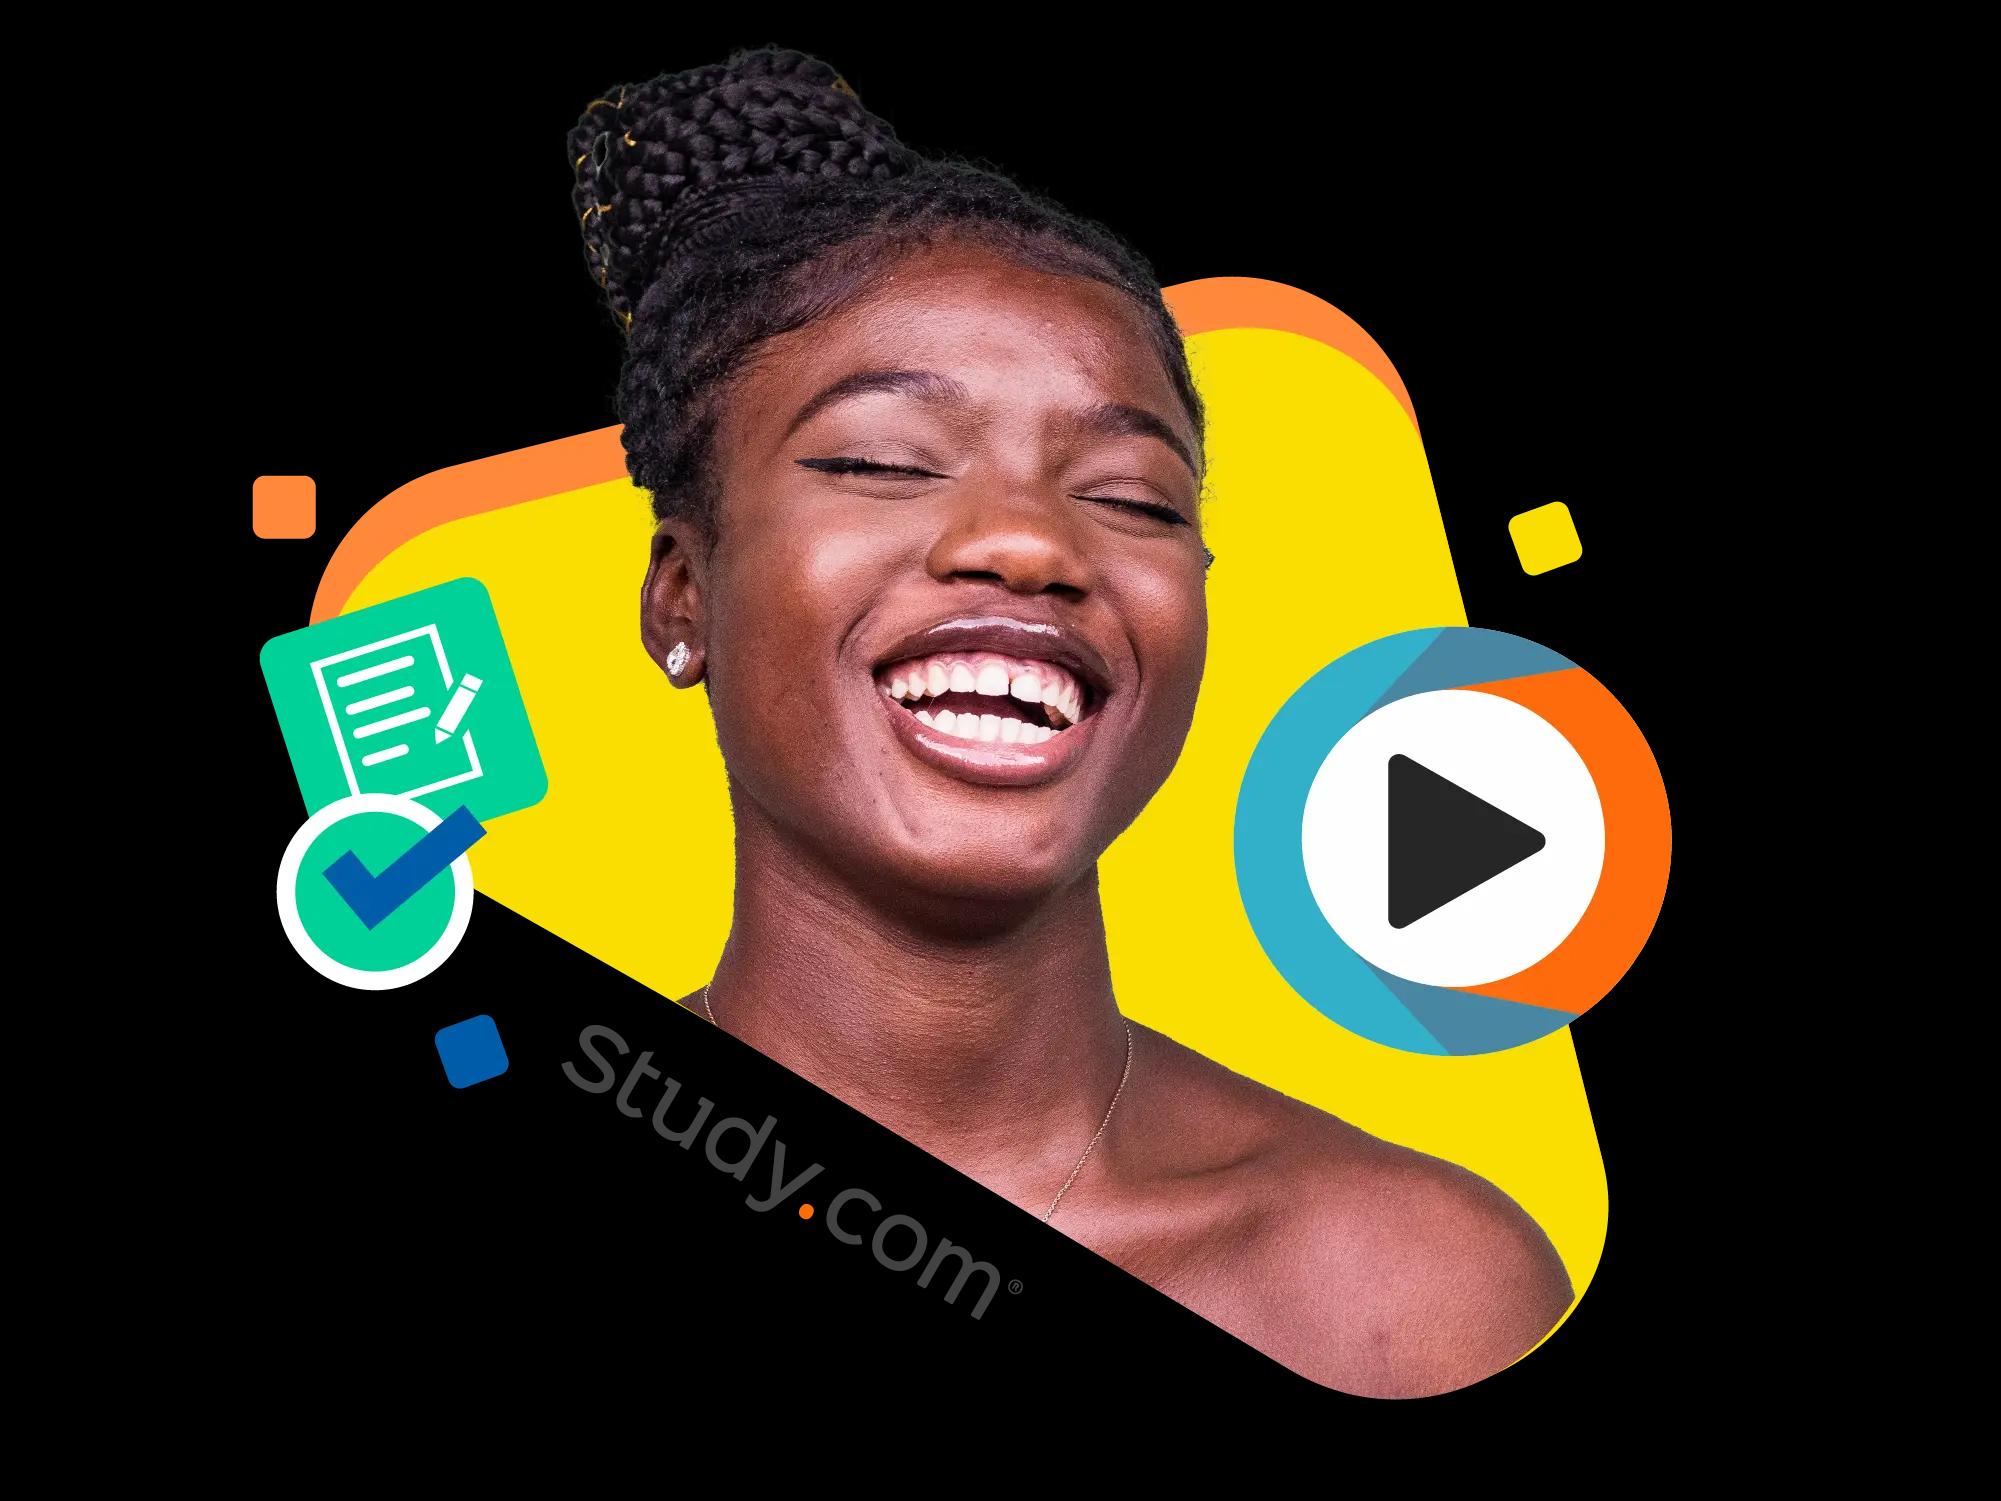 Photo of smiling woman surrounded by icons, including the Study.com logo